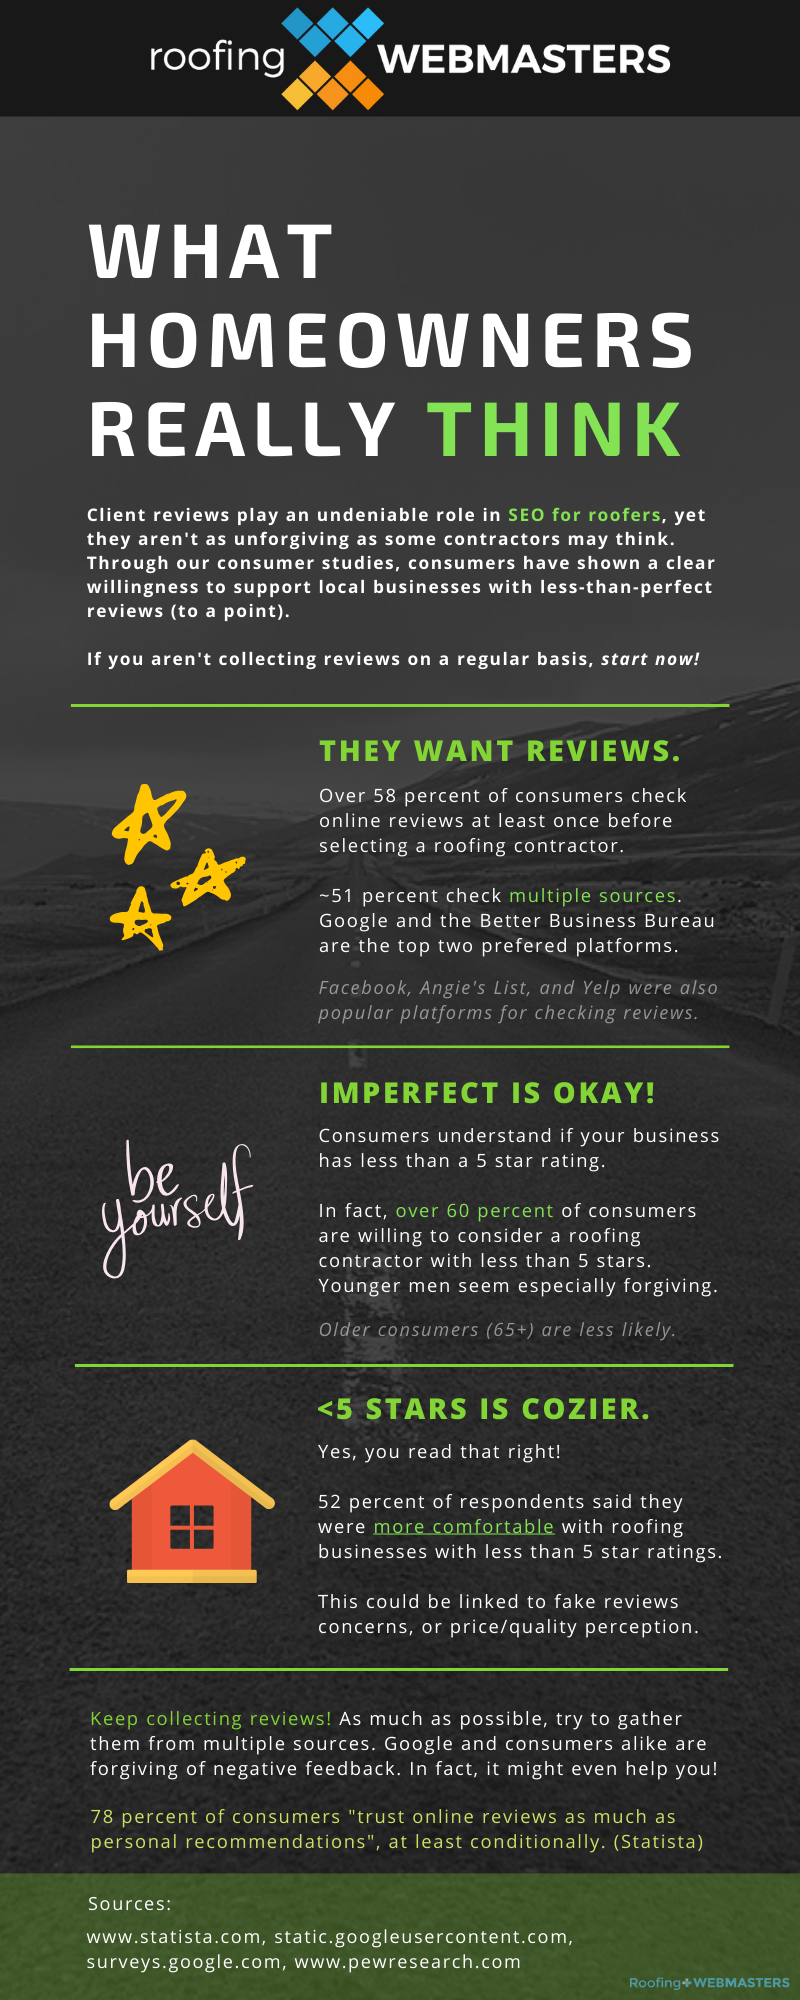 Key Findings From Our Consumer Surveys on Reviews